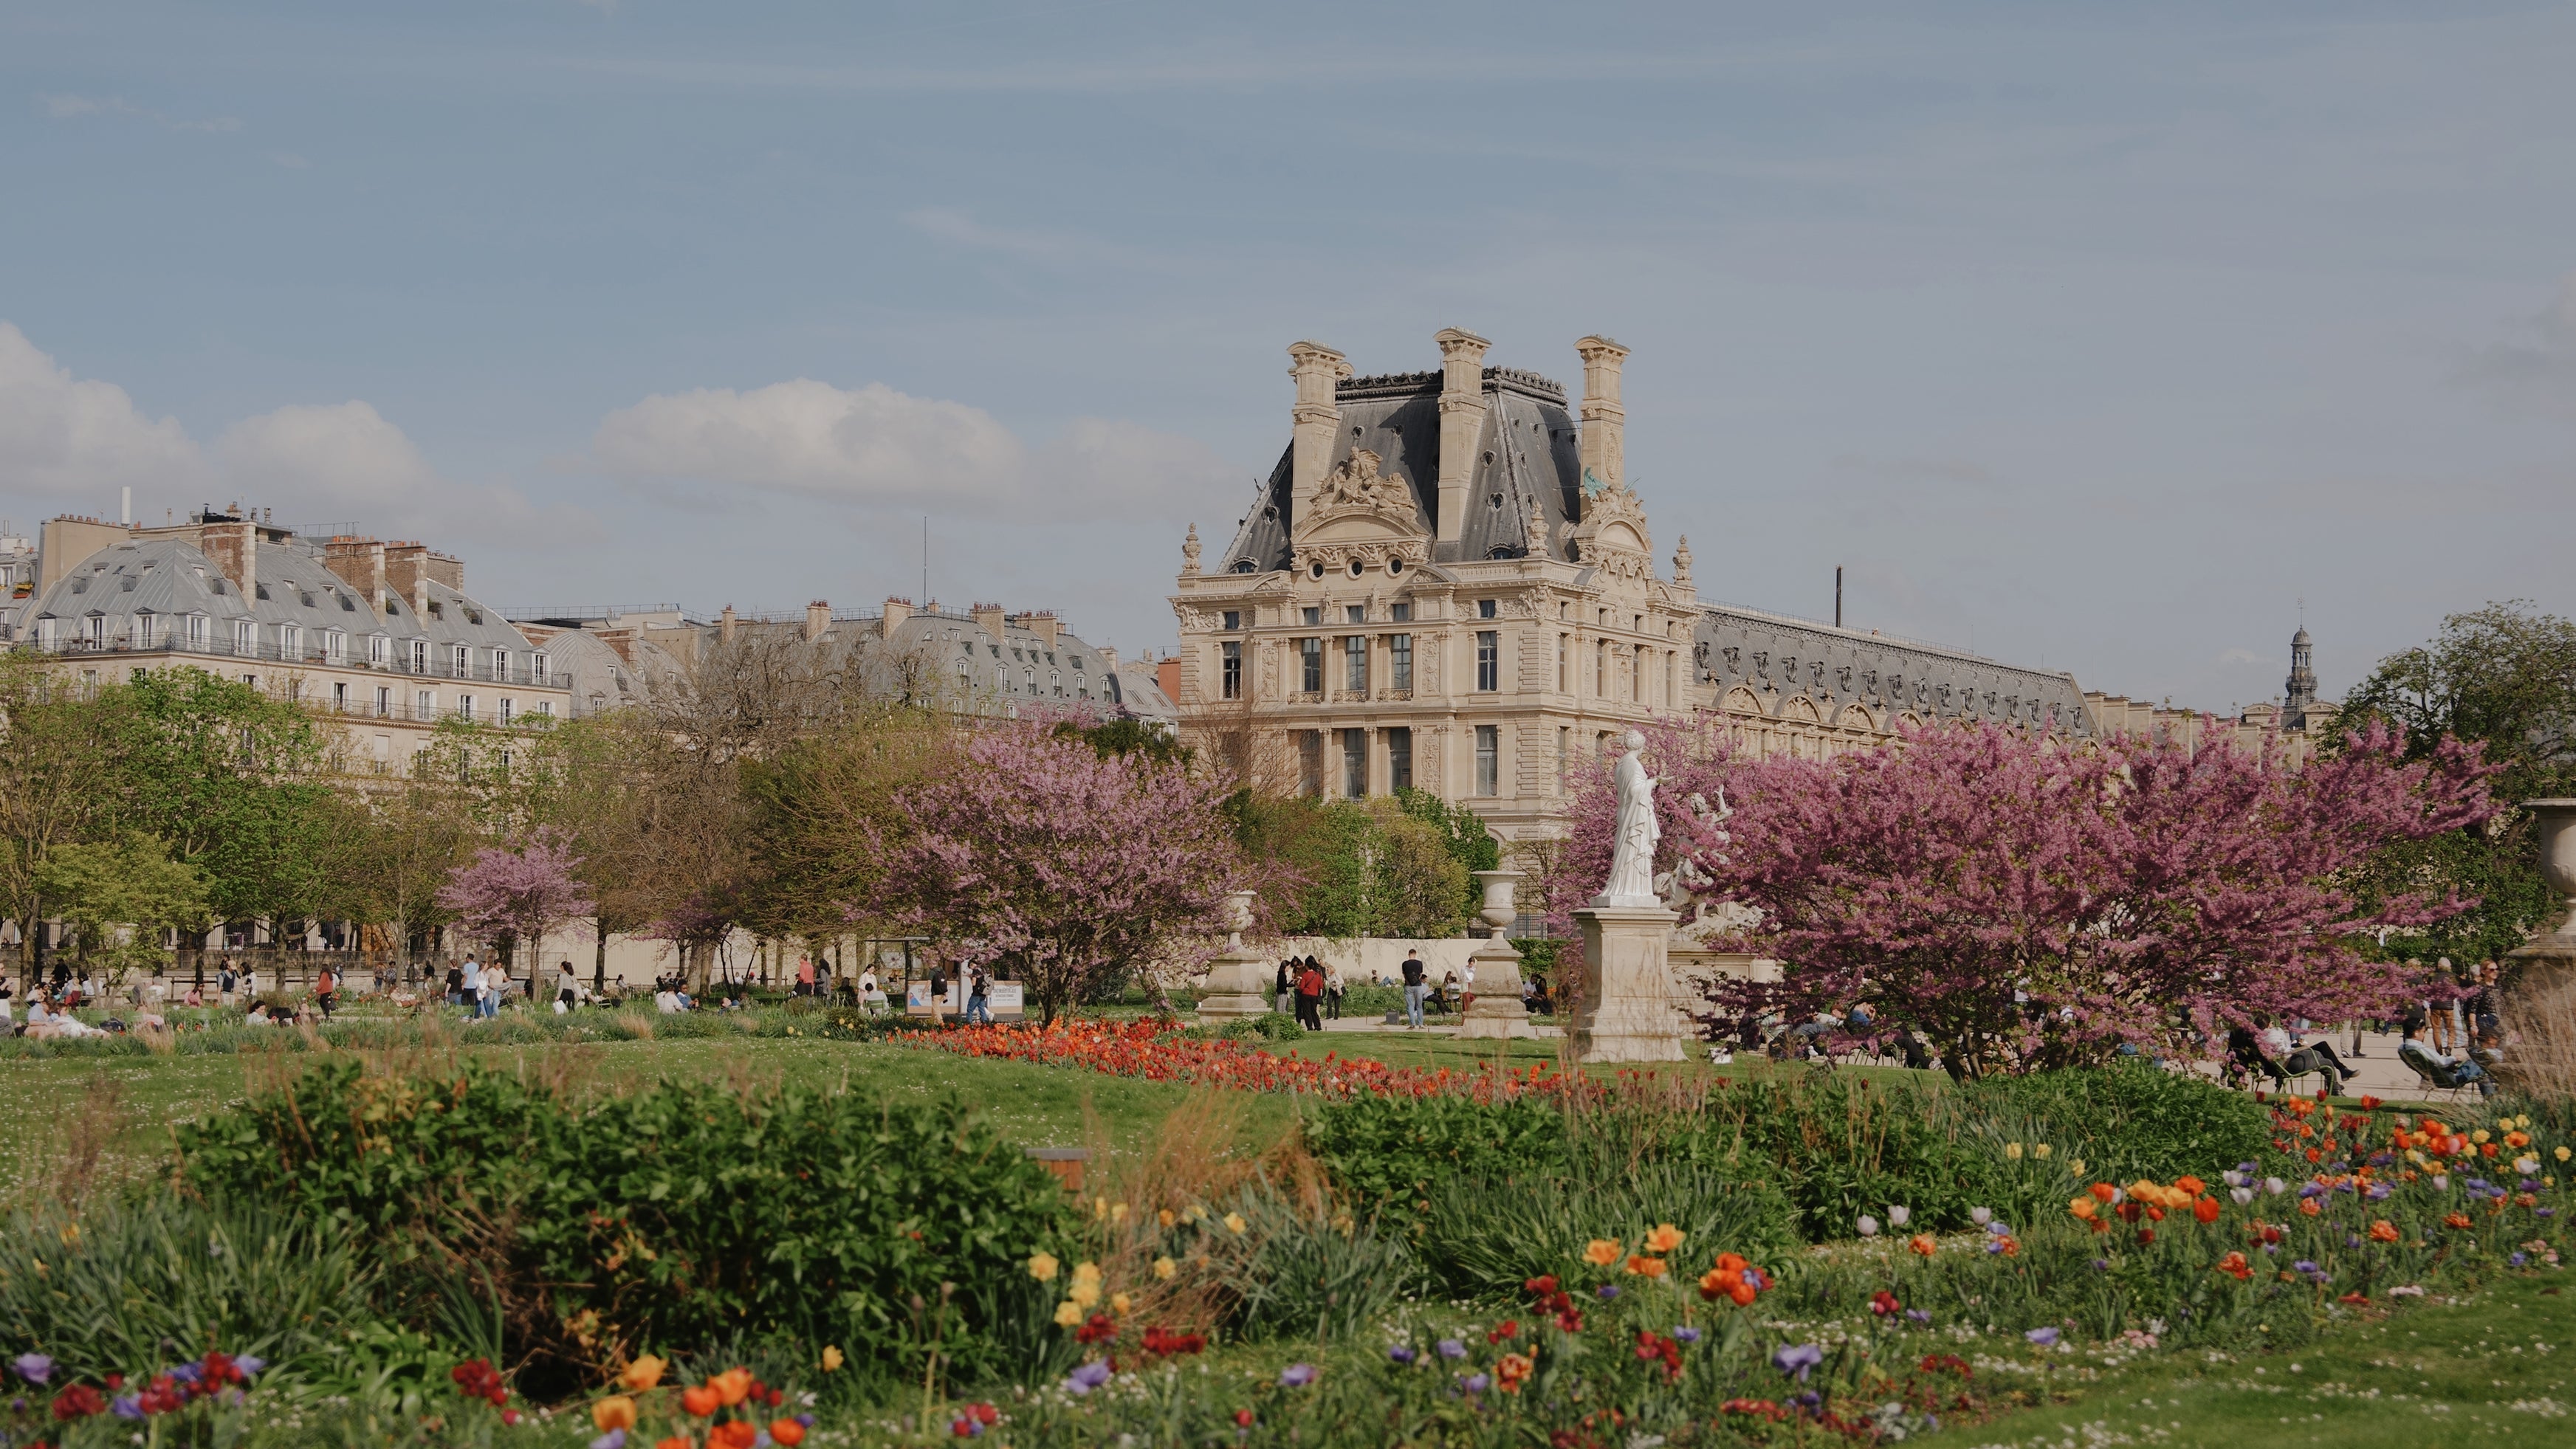 Jardin des Tuileries in early April, with the Cherry Trees in bloom and the gardens very flowery